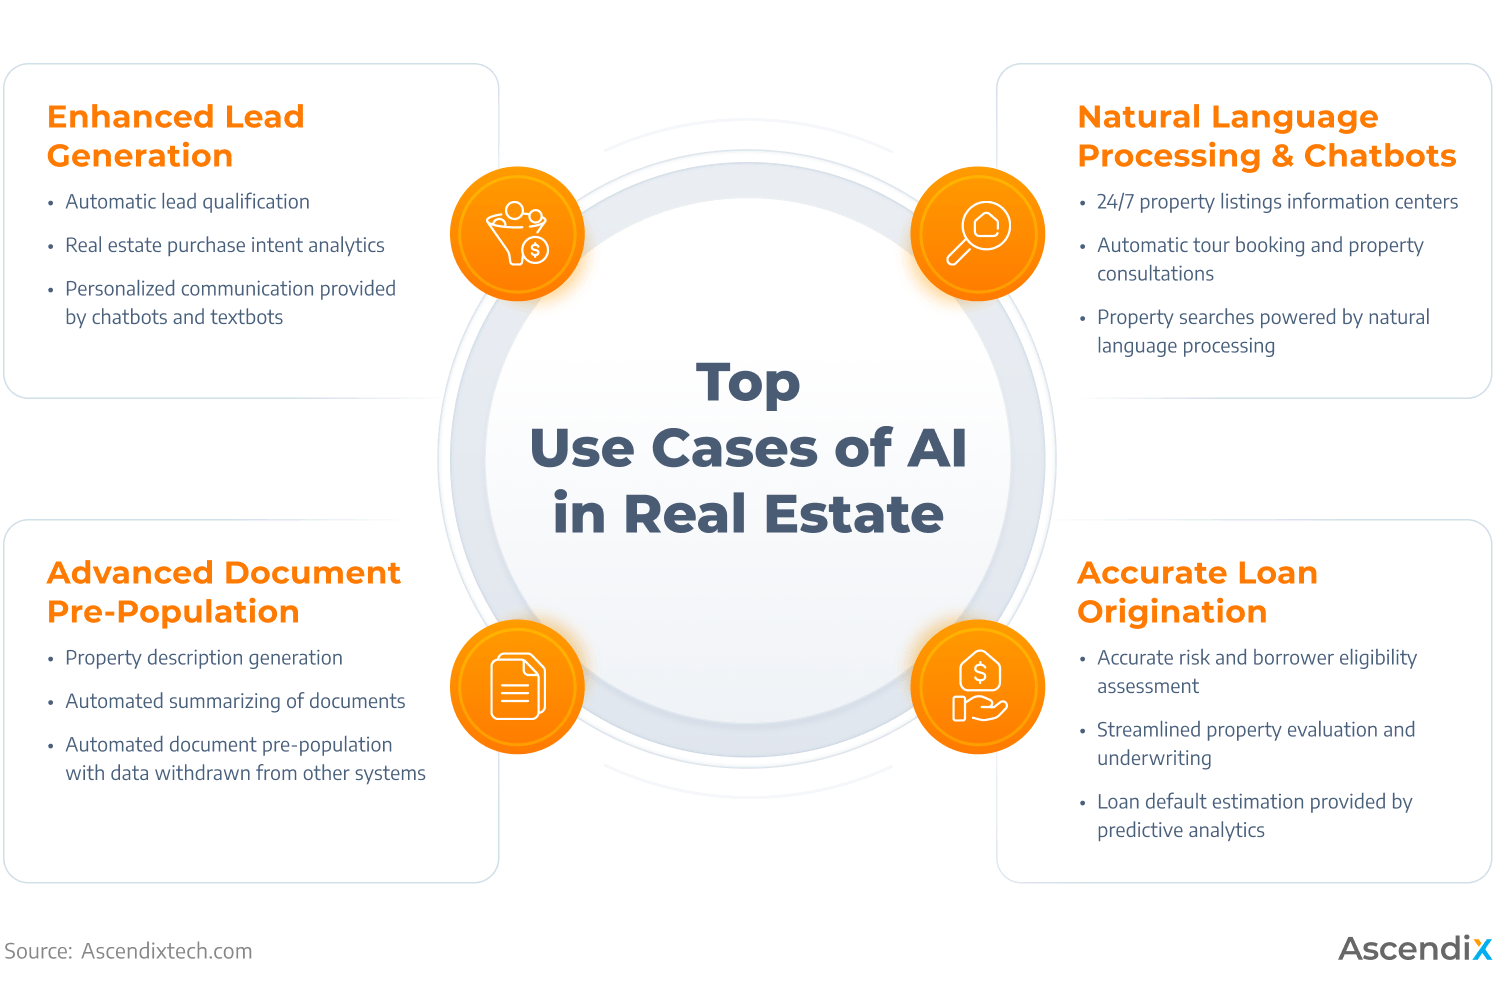 Top Use Cases of AI in Real Estate